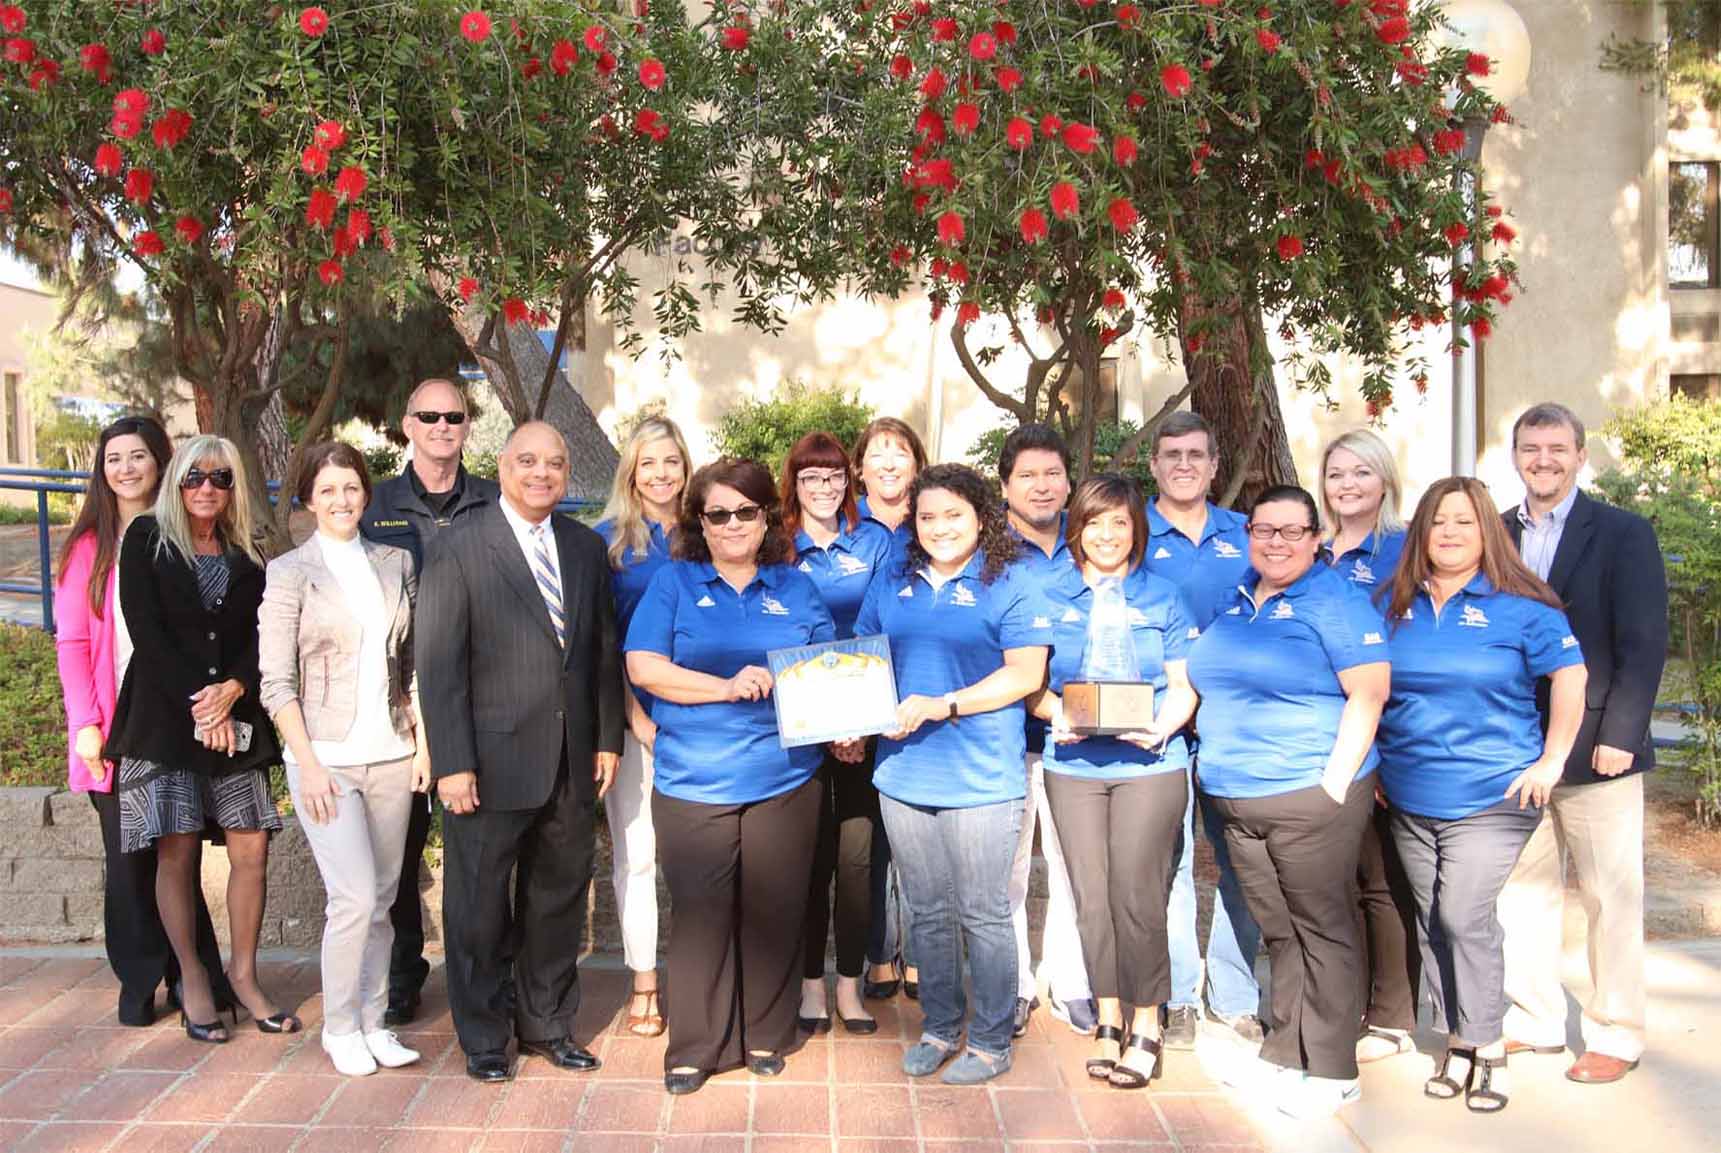 Payroll Services recieveing Most Beautiful Area on Campus award